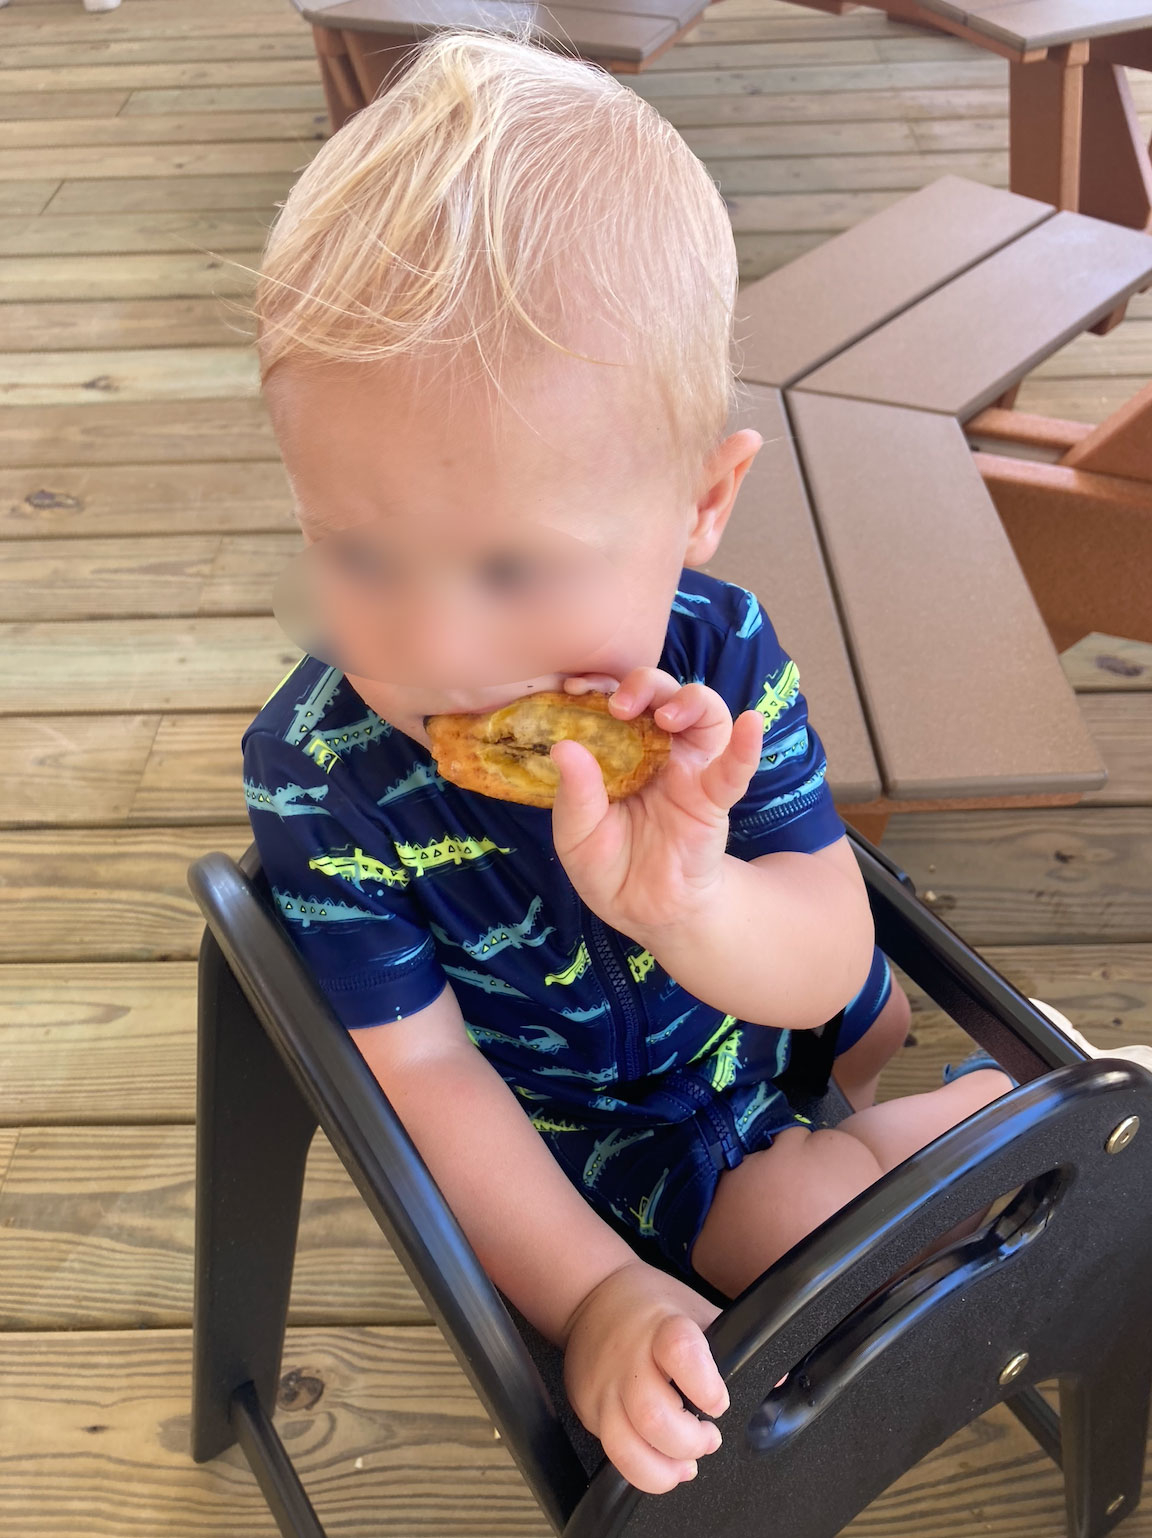 A young child with light hair, seated in a high chair, eating a snack